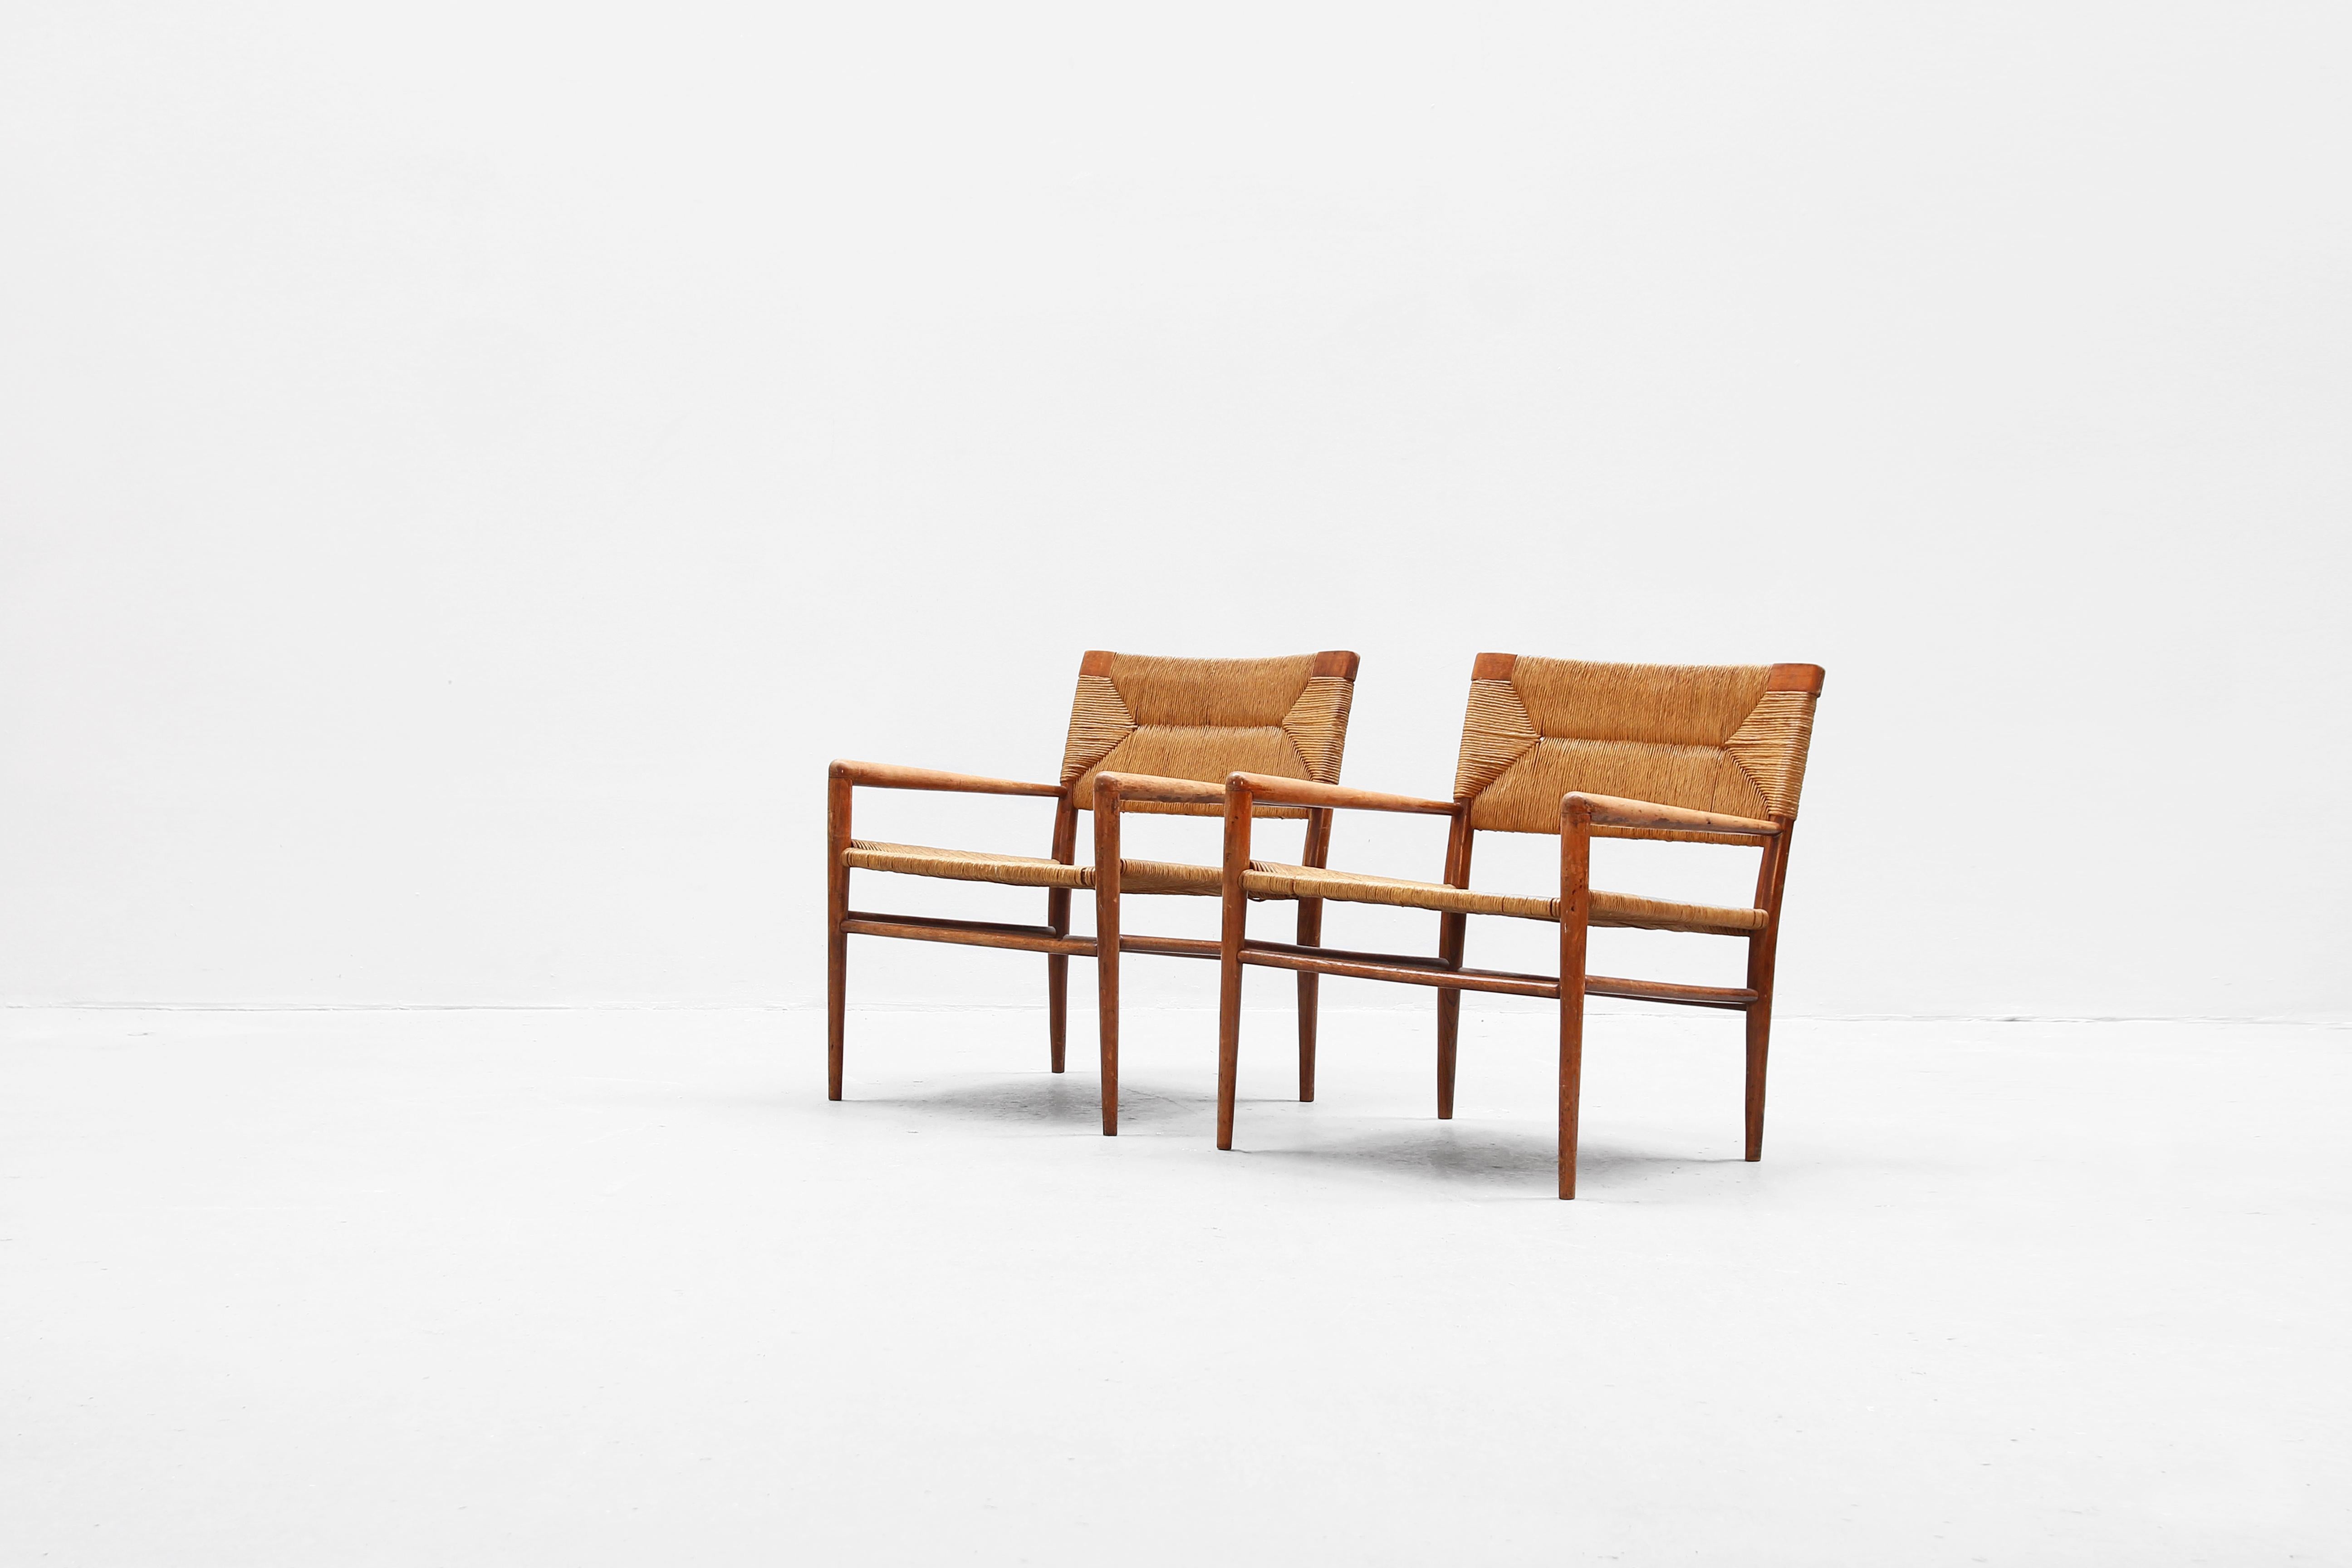 American Craftsman Pair of American Lounge Chairs by Mel Smilow for Smilow-Thielle 1950ies